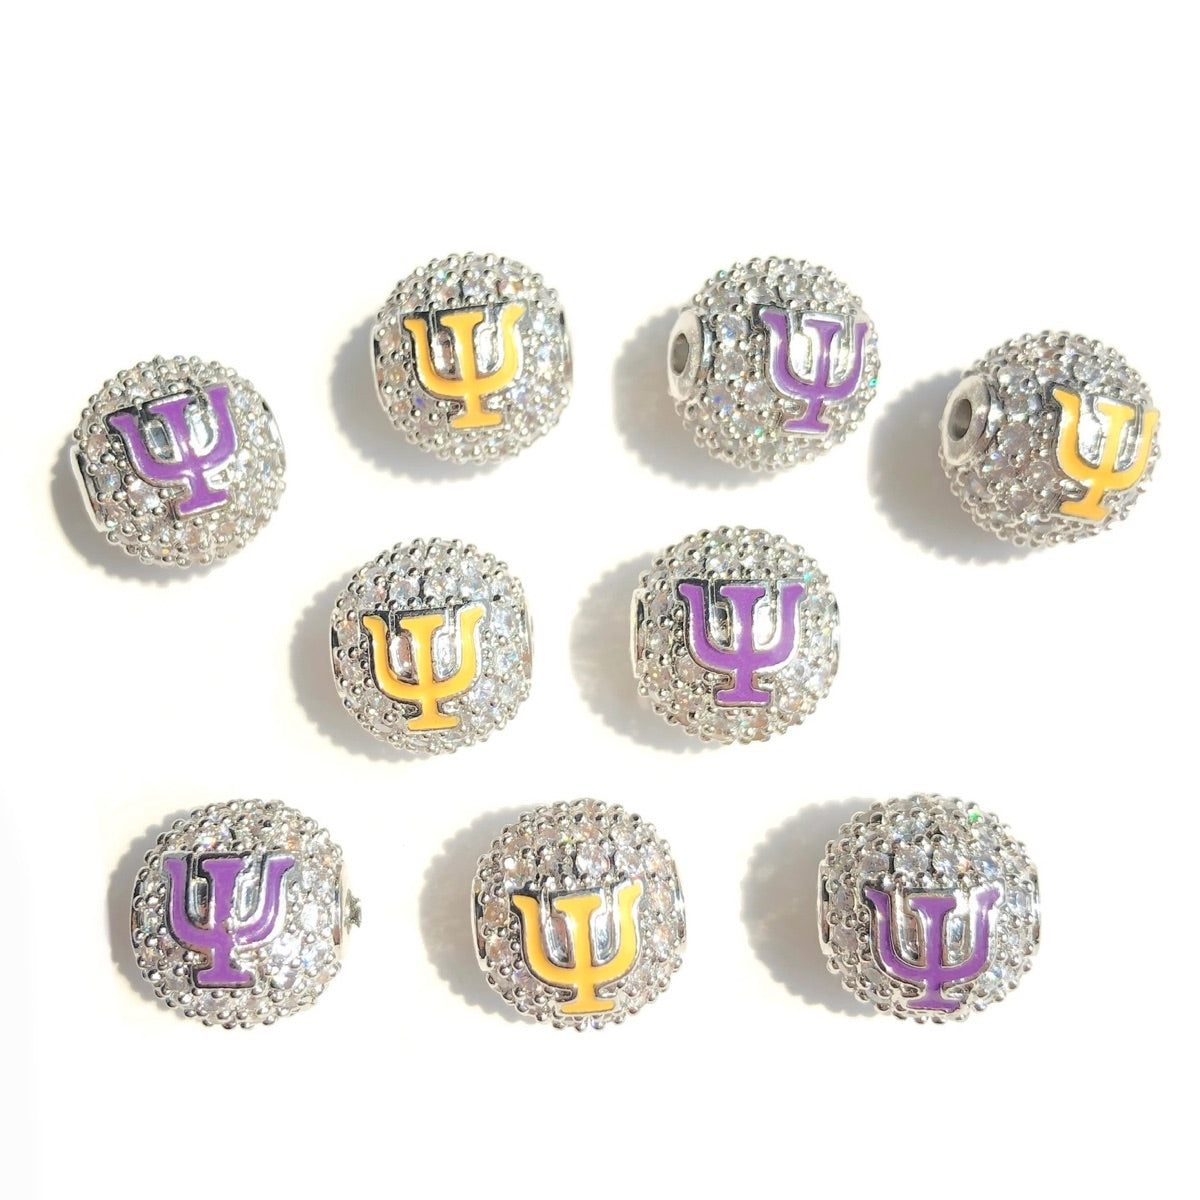 12pcs/lot 10mm Purple Yellow Enamel CZ Paved Greek Letter "Ψ", "Φ", "Ω" Ball Spacers Beads 12 Silve Ψ CZ Paved Spacers 10mm Beads Ball Beads Greek Letters New Spacers Arrivals Charms Beads Beyond